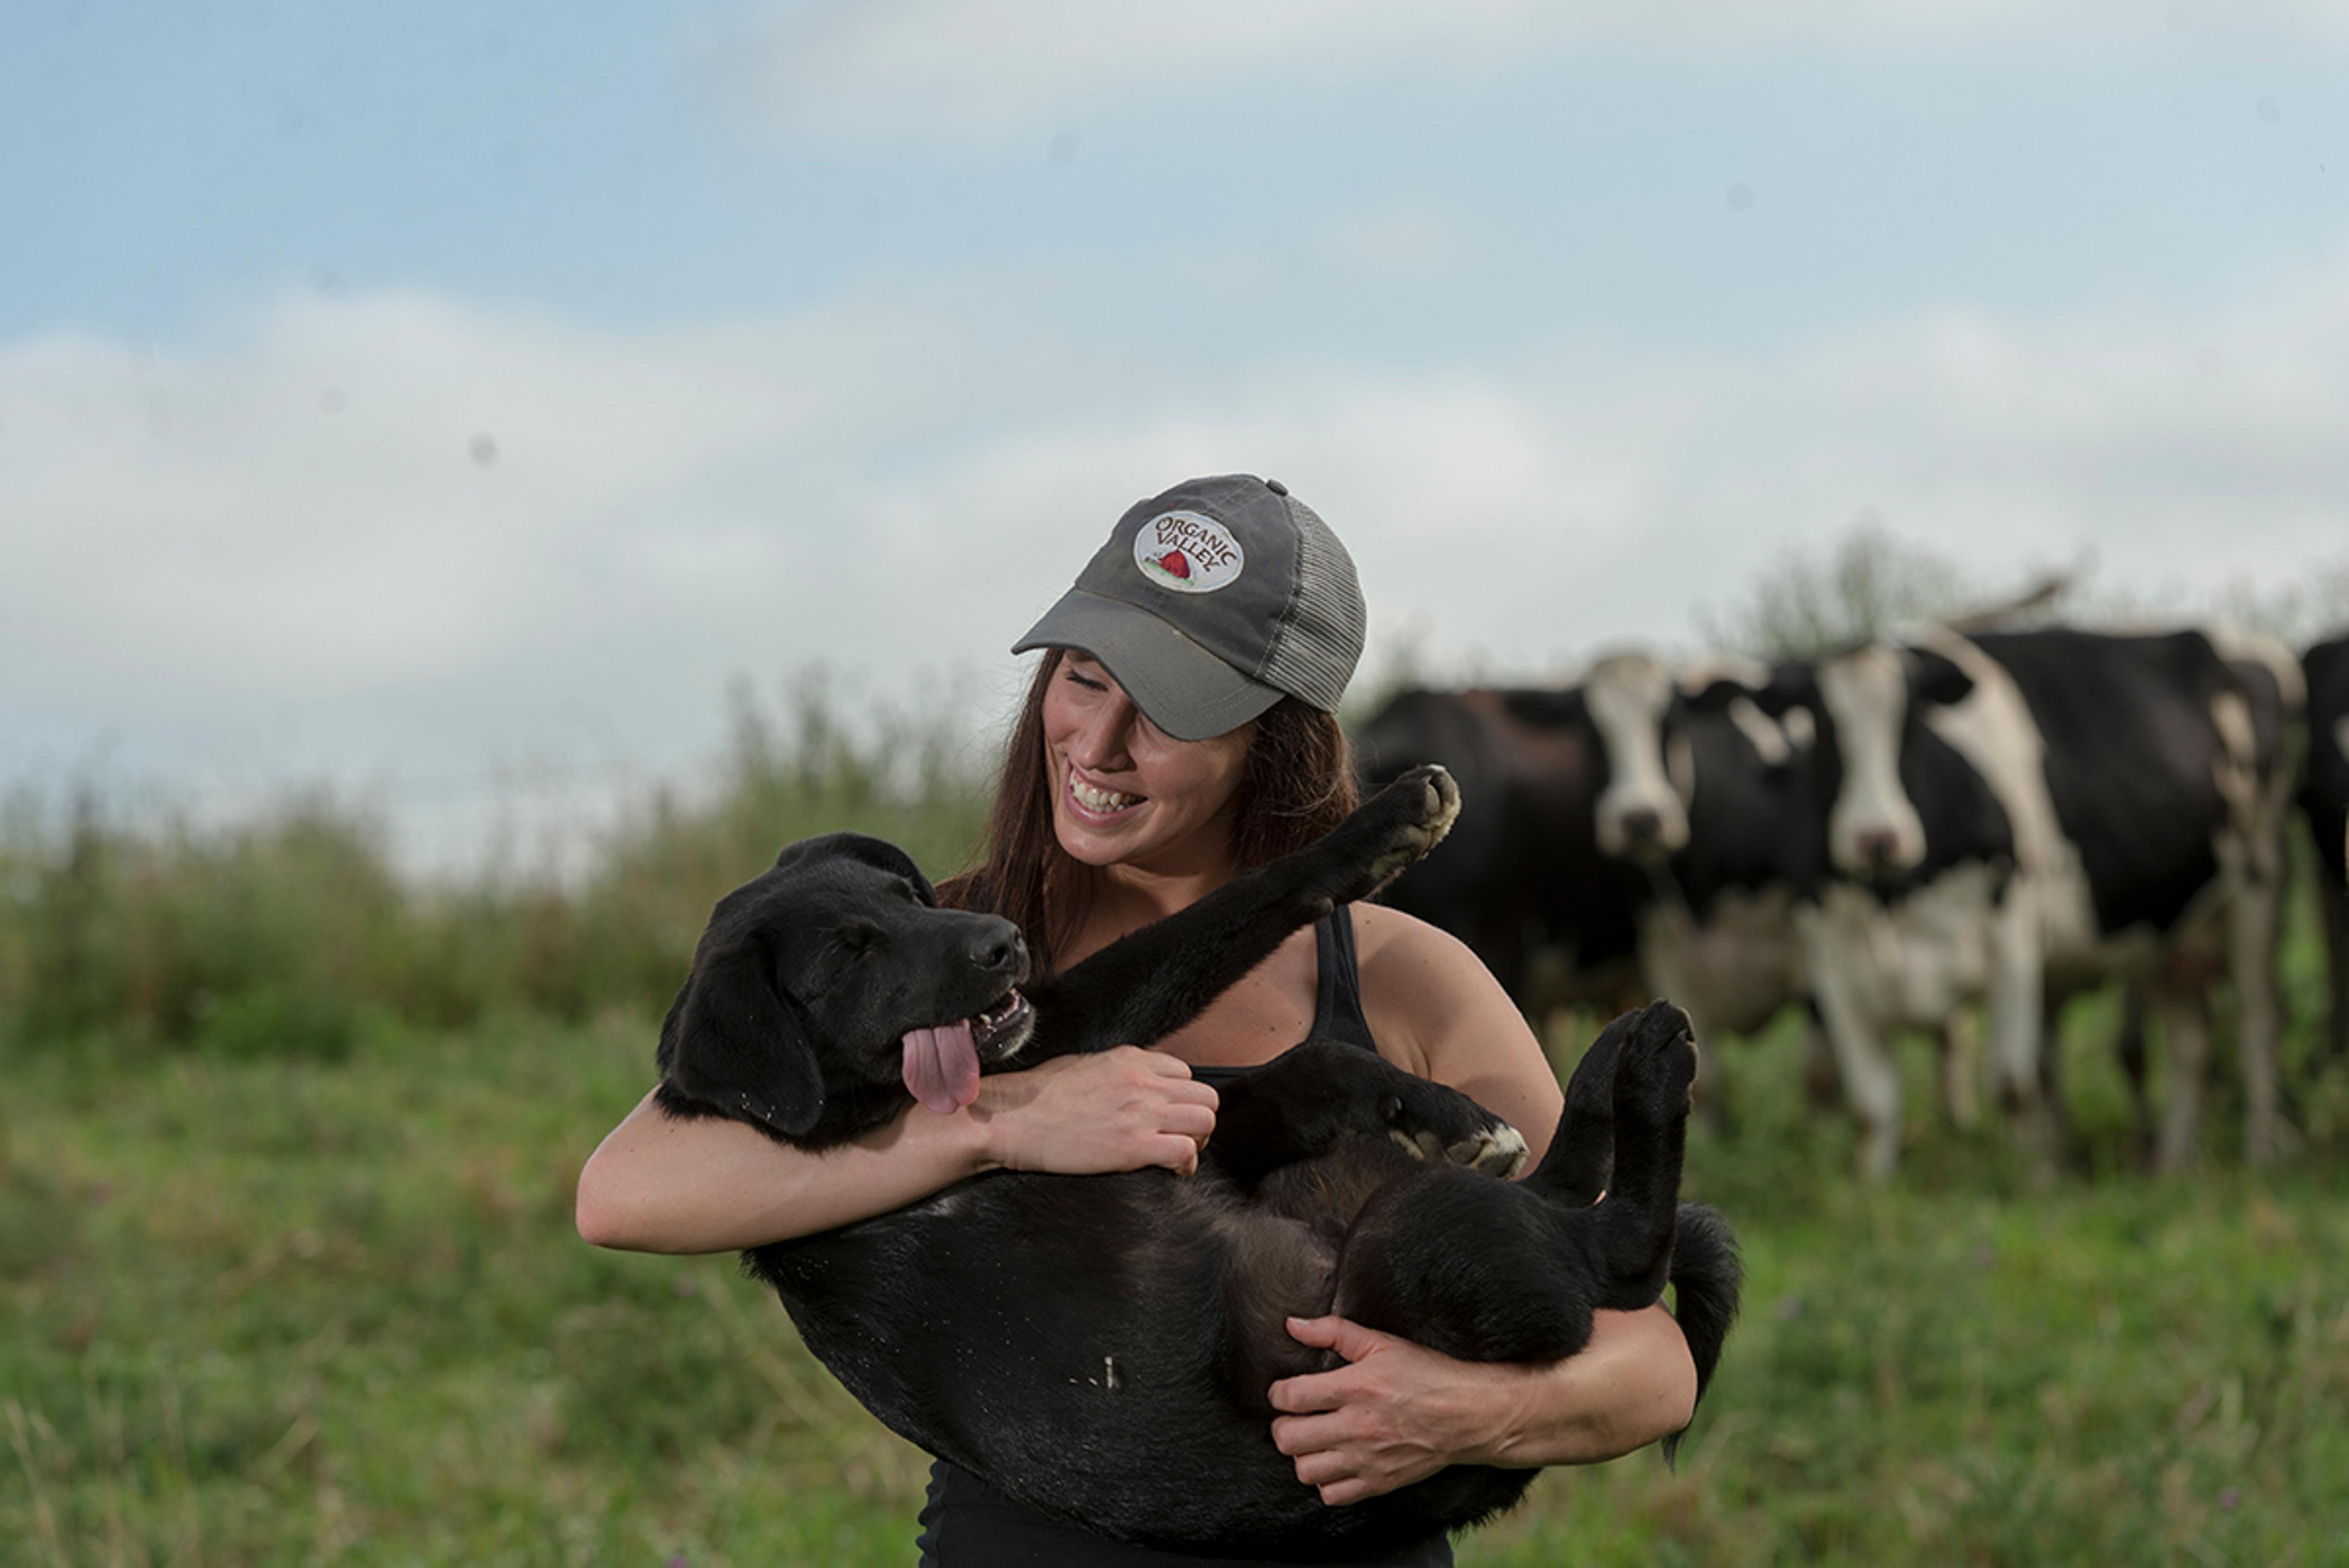 A young woman wearing an Organic Valley cap smiles down at a black puppy in her arms with its tongue hanging out.